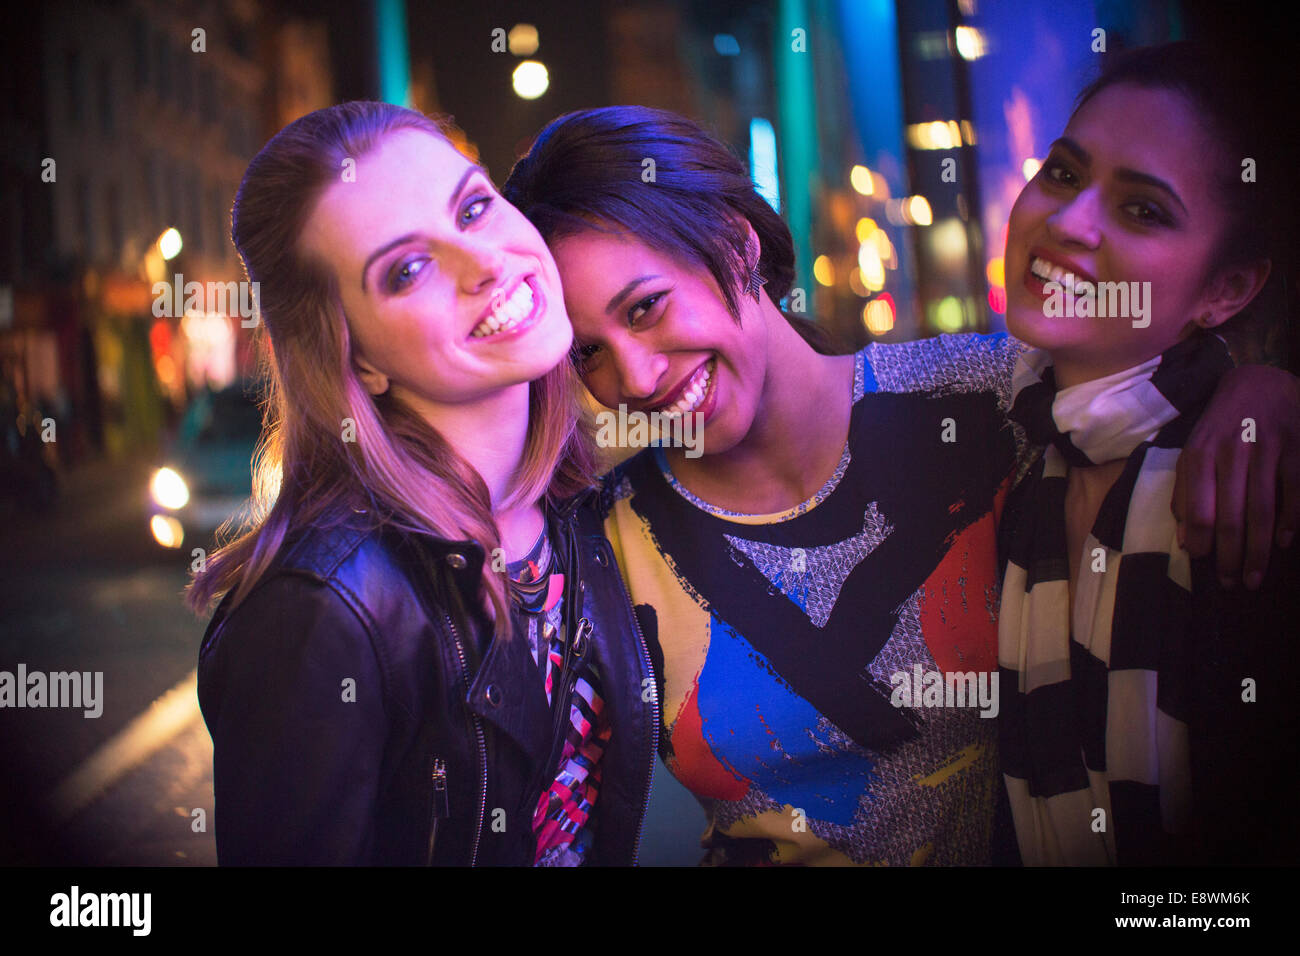 Women smiling together outside of store at night Stock Photo